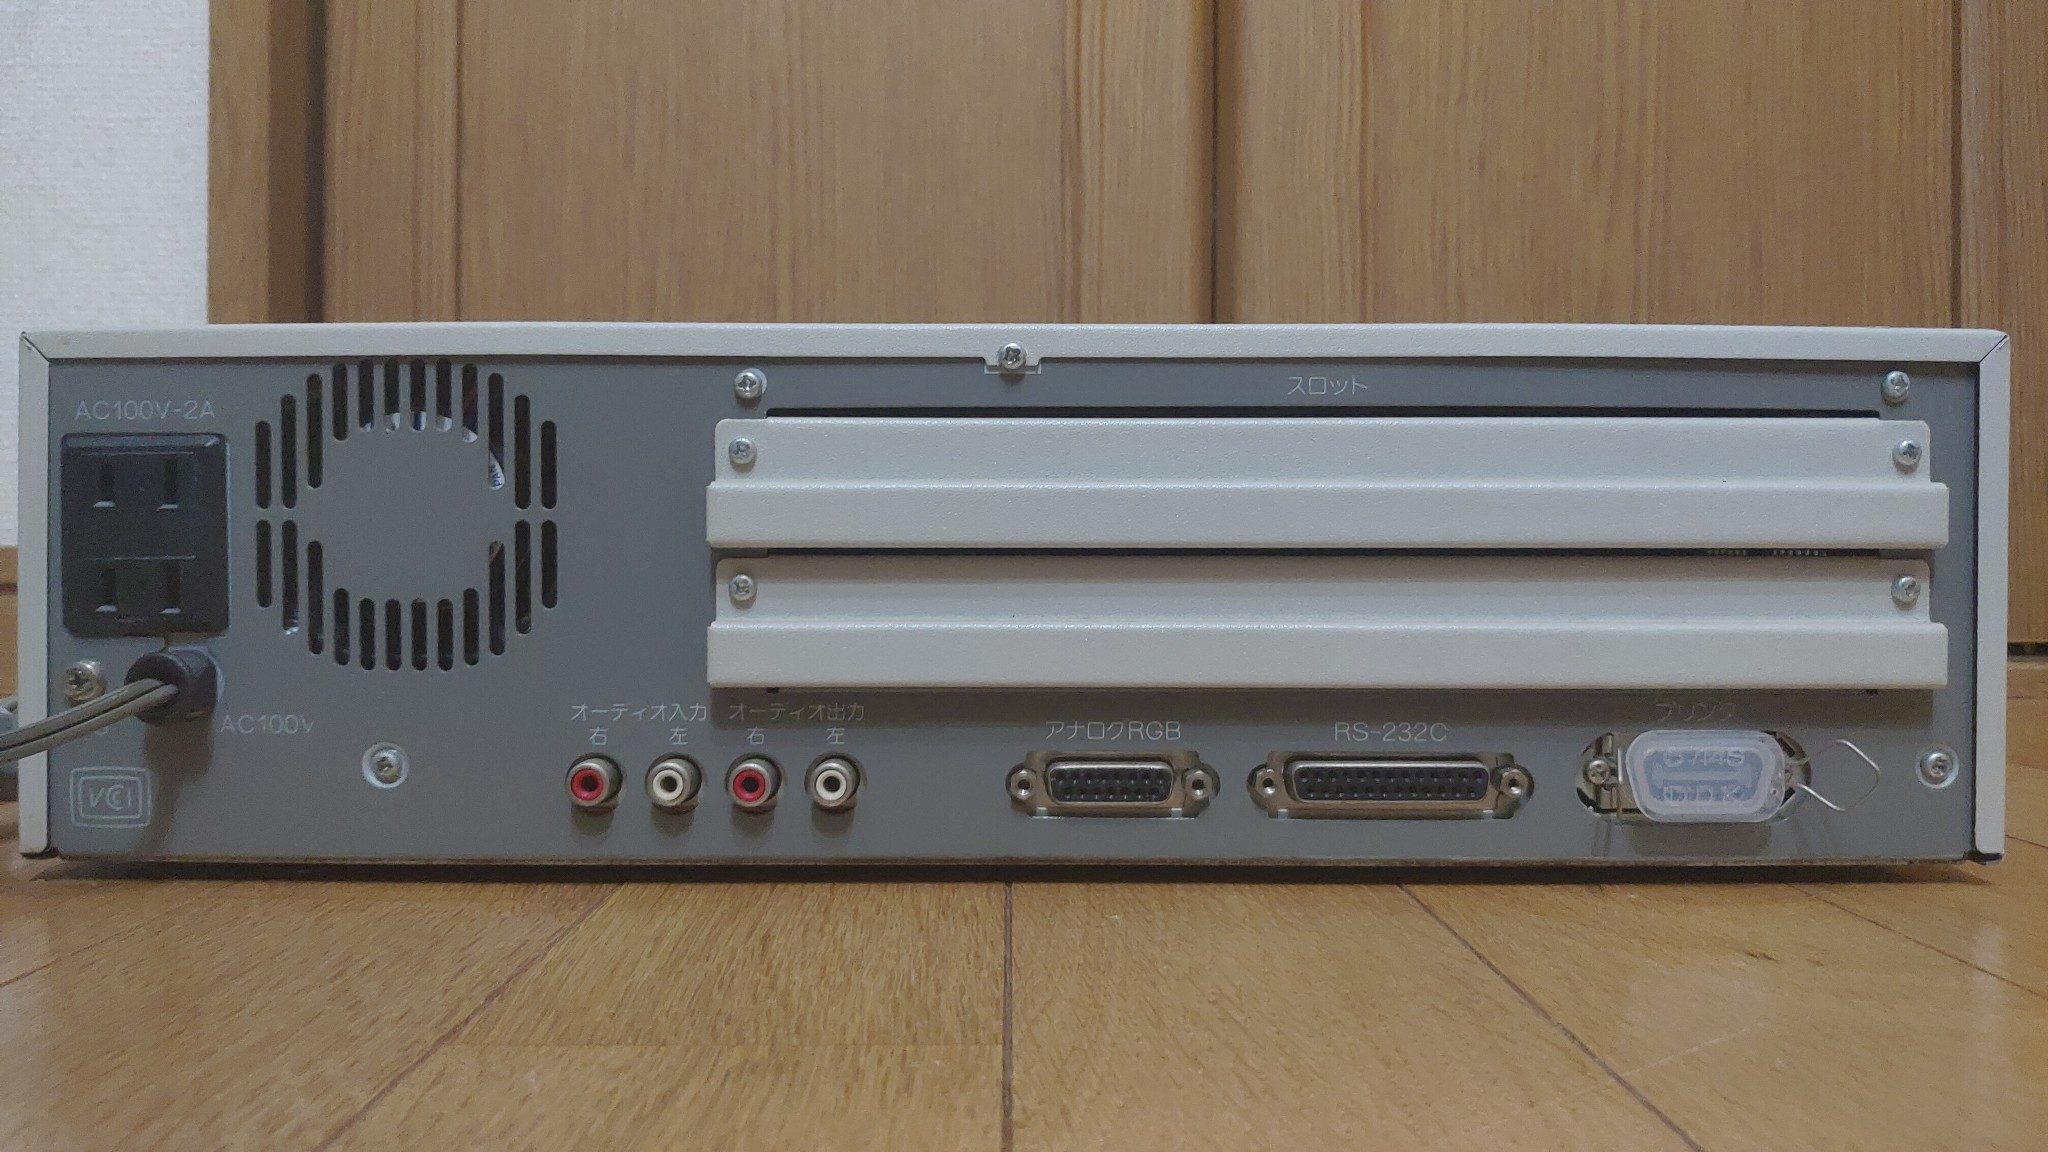 PC/タブレット デスクトップ型PC NEC PC-8801MA2 – Japanese Vintage Computer Collection